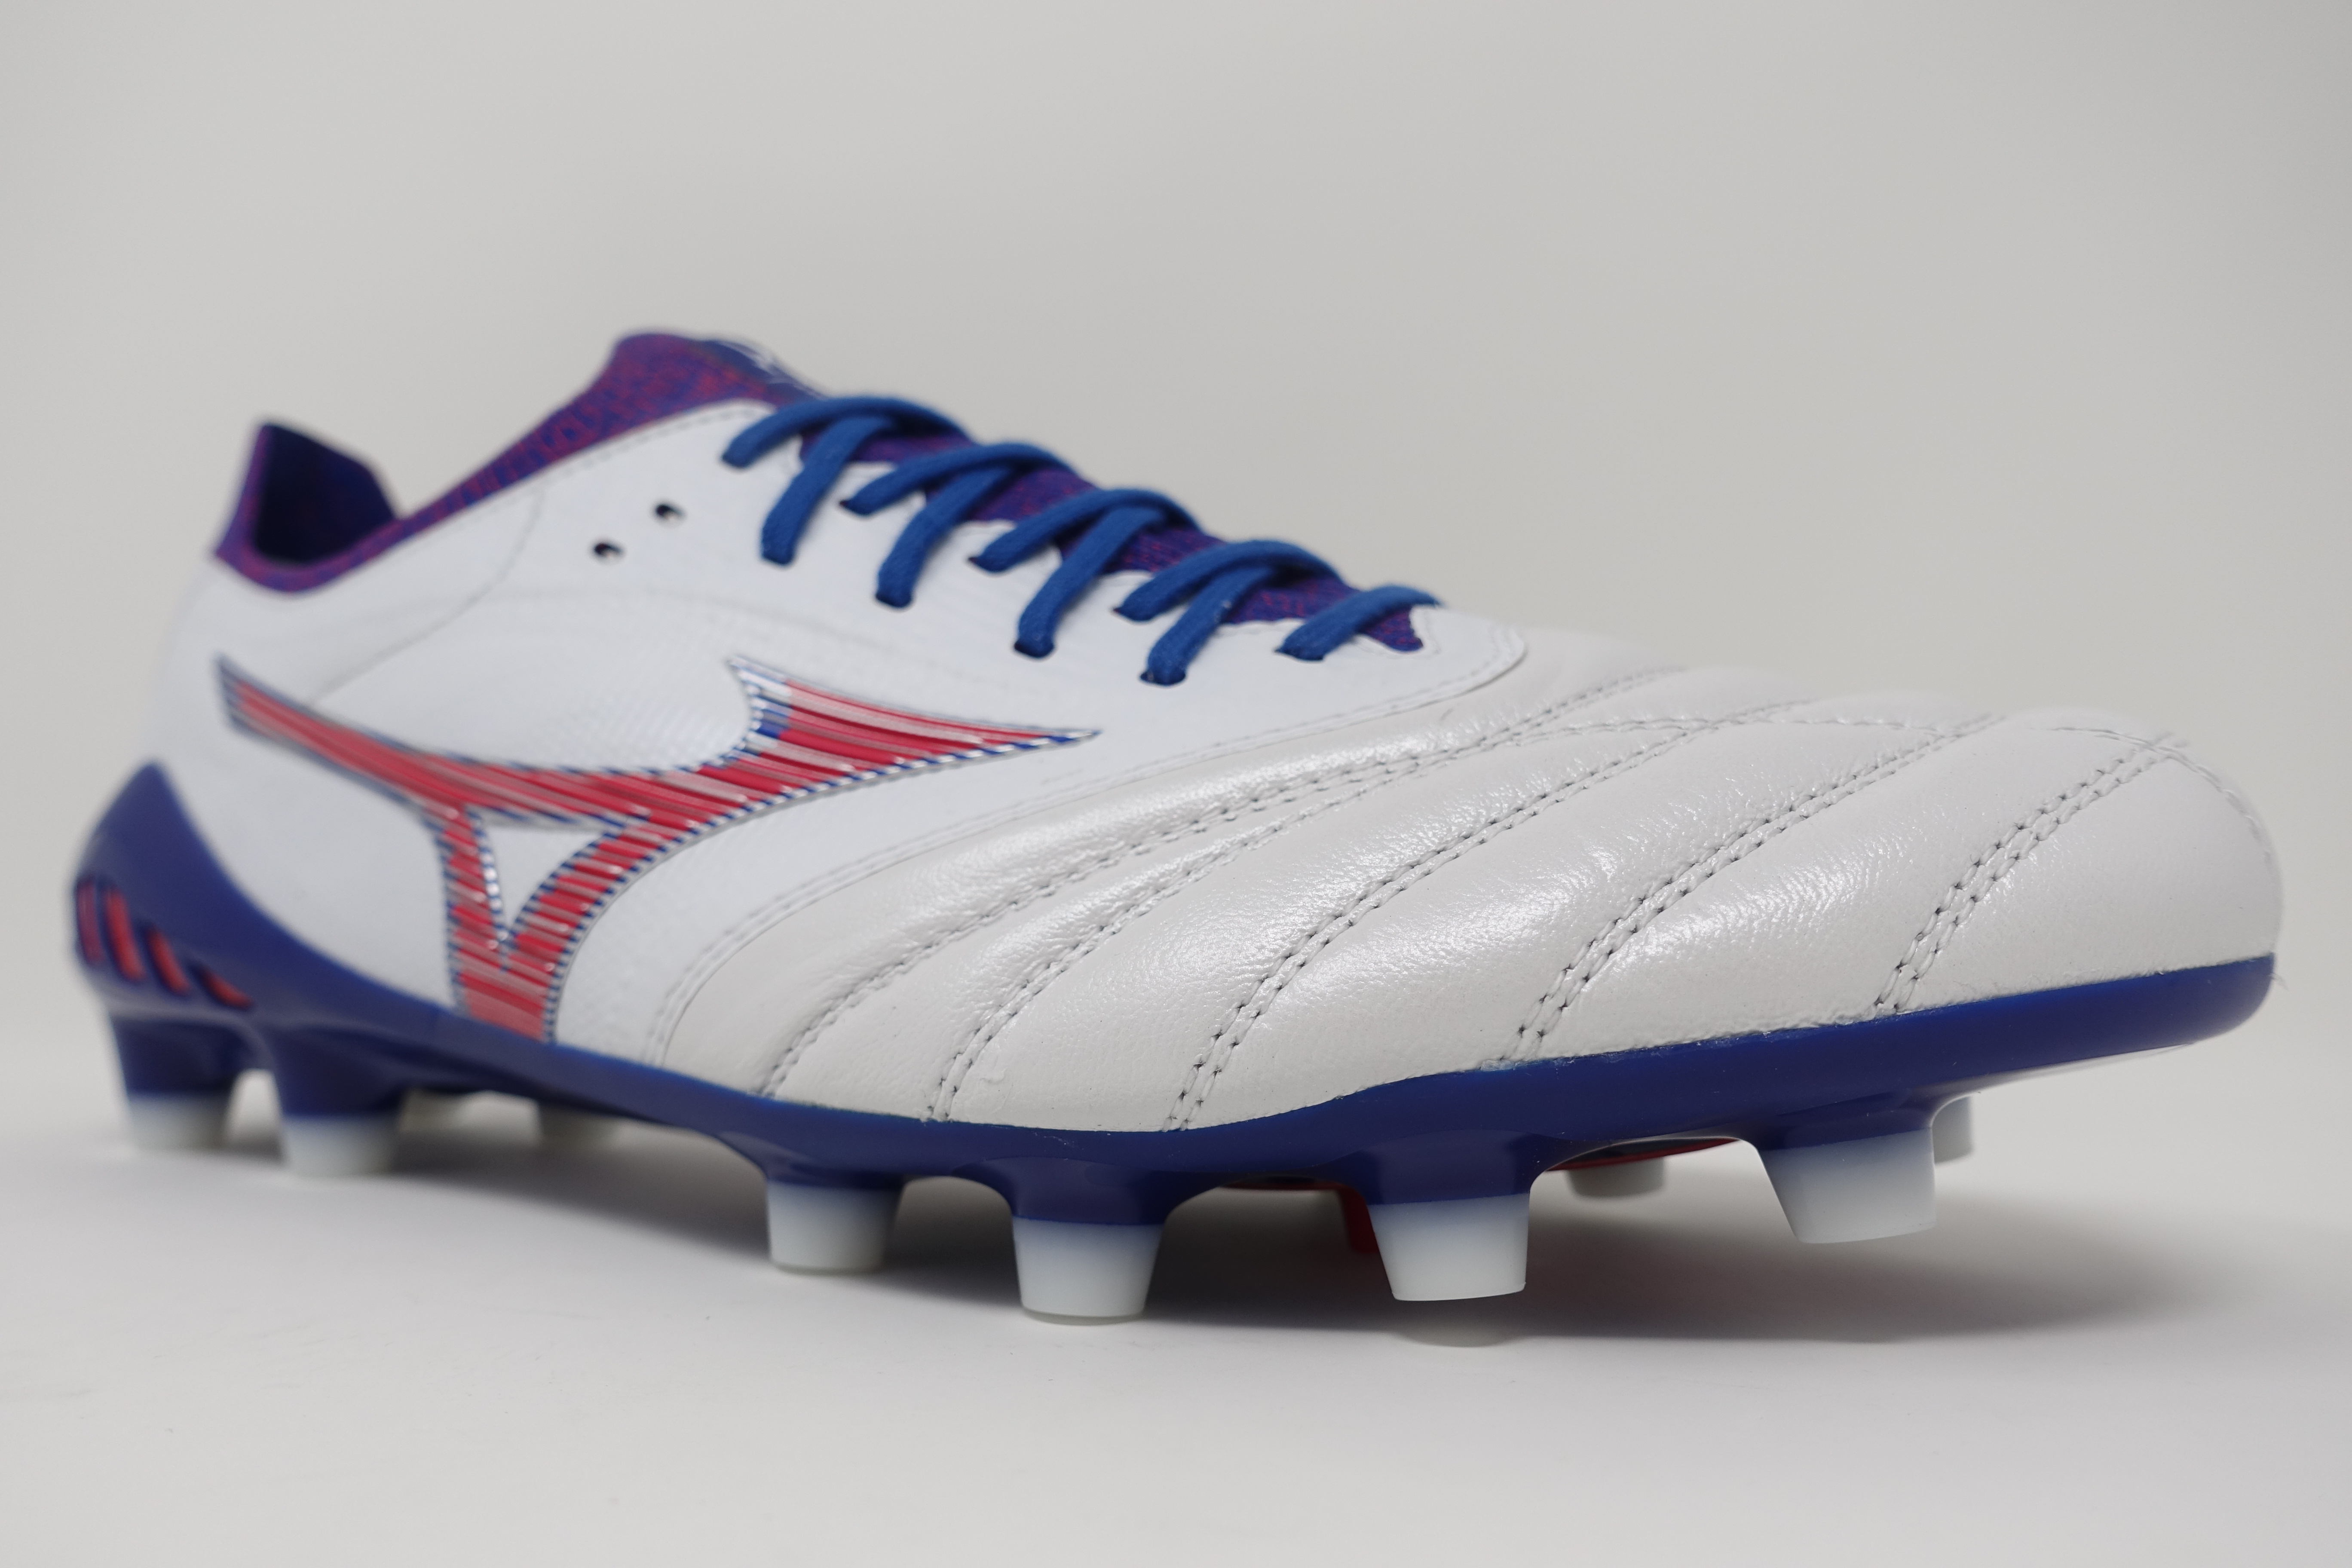 Mizuno-Morelia-Neo-3-Made-in-Japan-Next-Wave-Pack-Soccer-Football-Boots-12